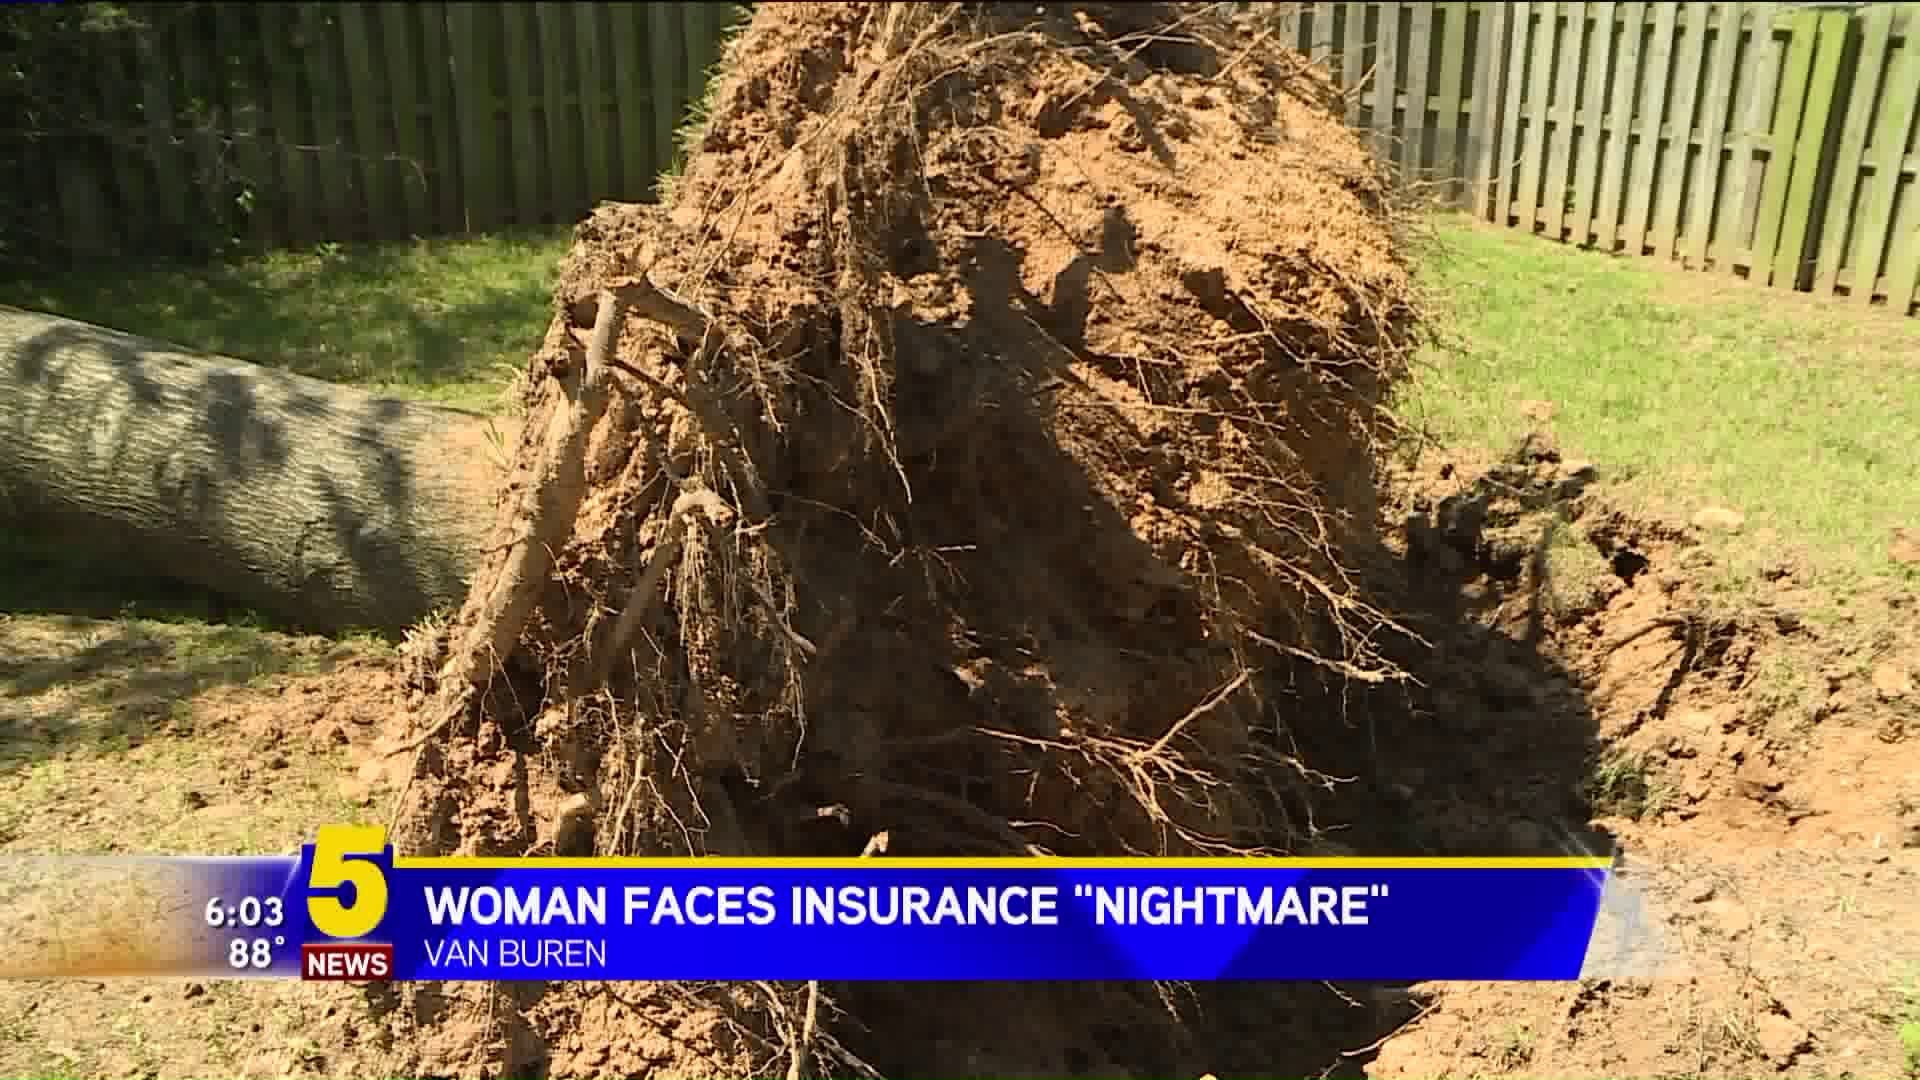 Woman Faces Insurance "Nightmare"